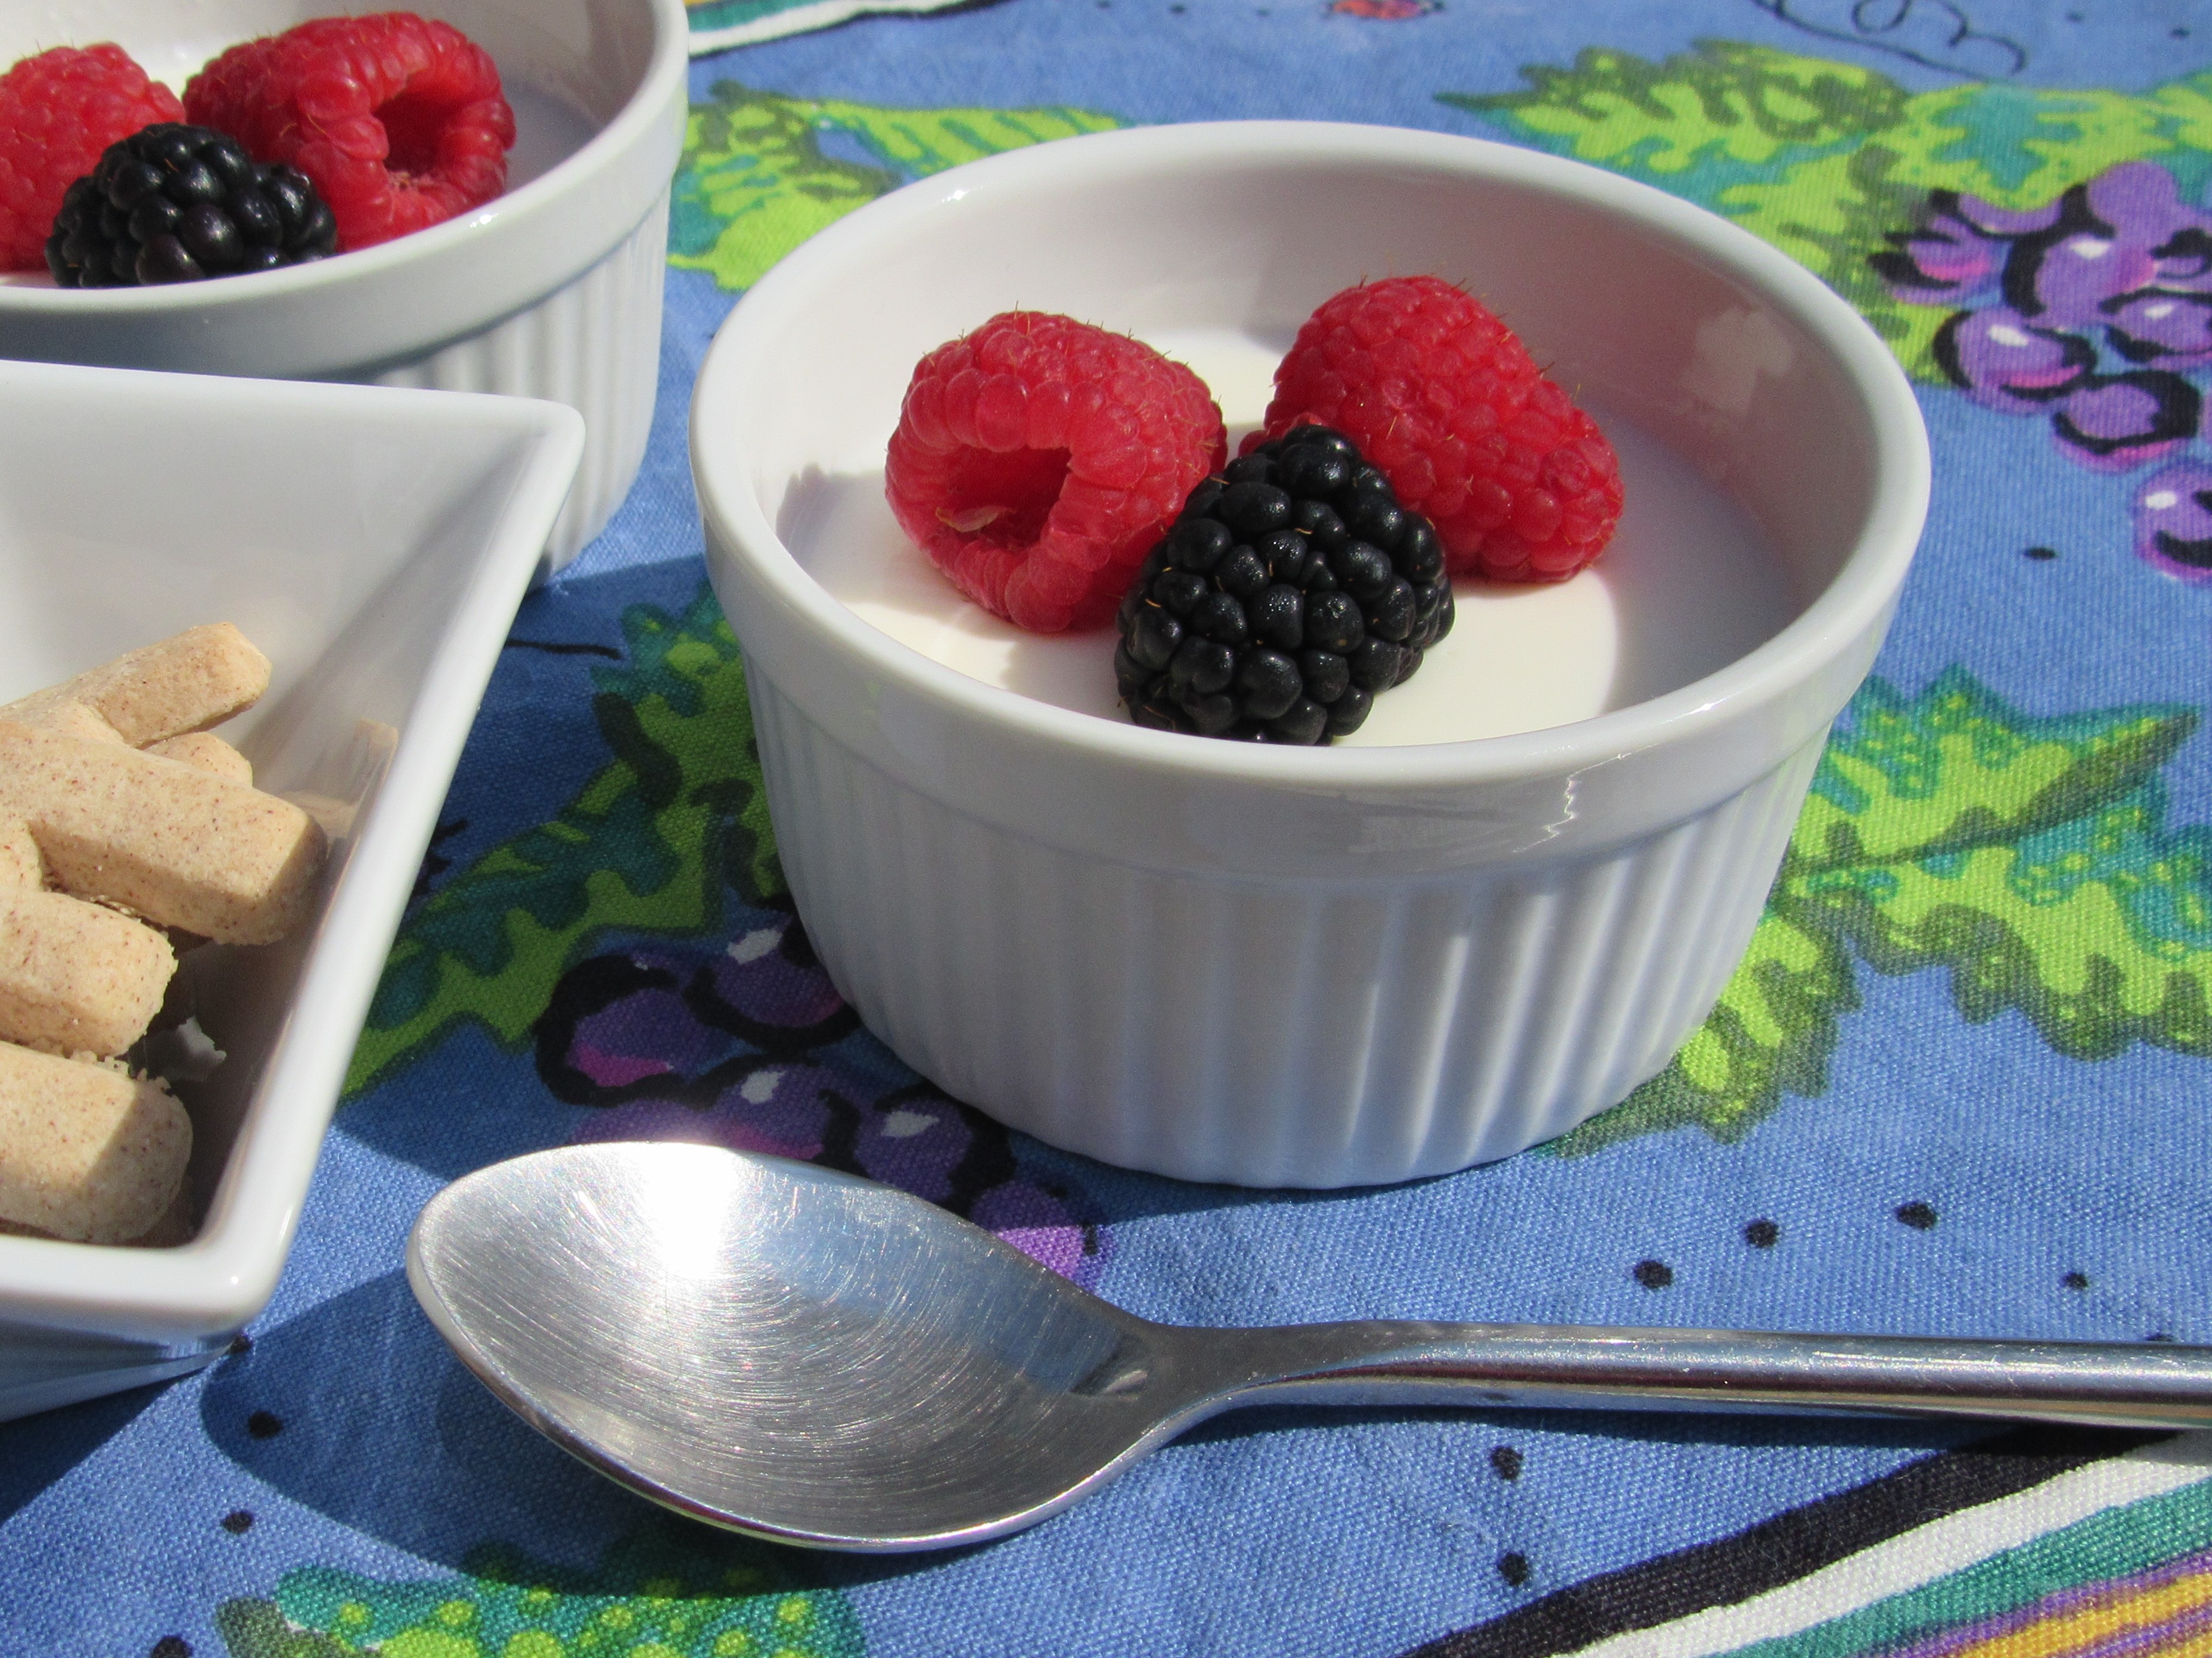 Ramakin filled with Panna Cotta topped with raspberries and a blackberry next to plate of biscotti. 